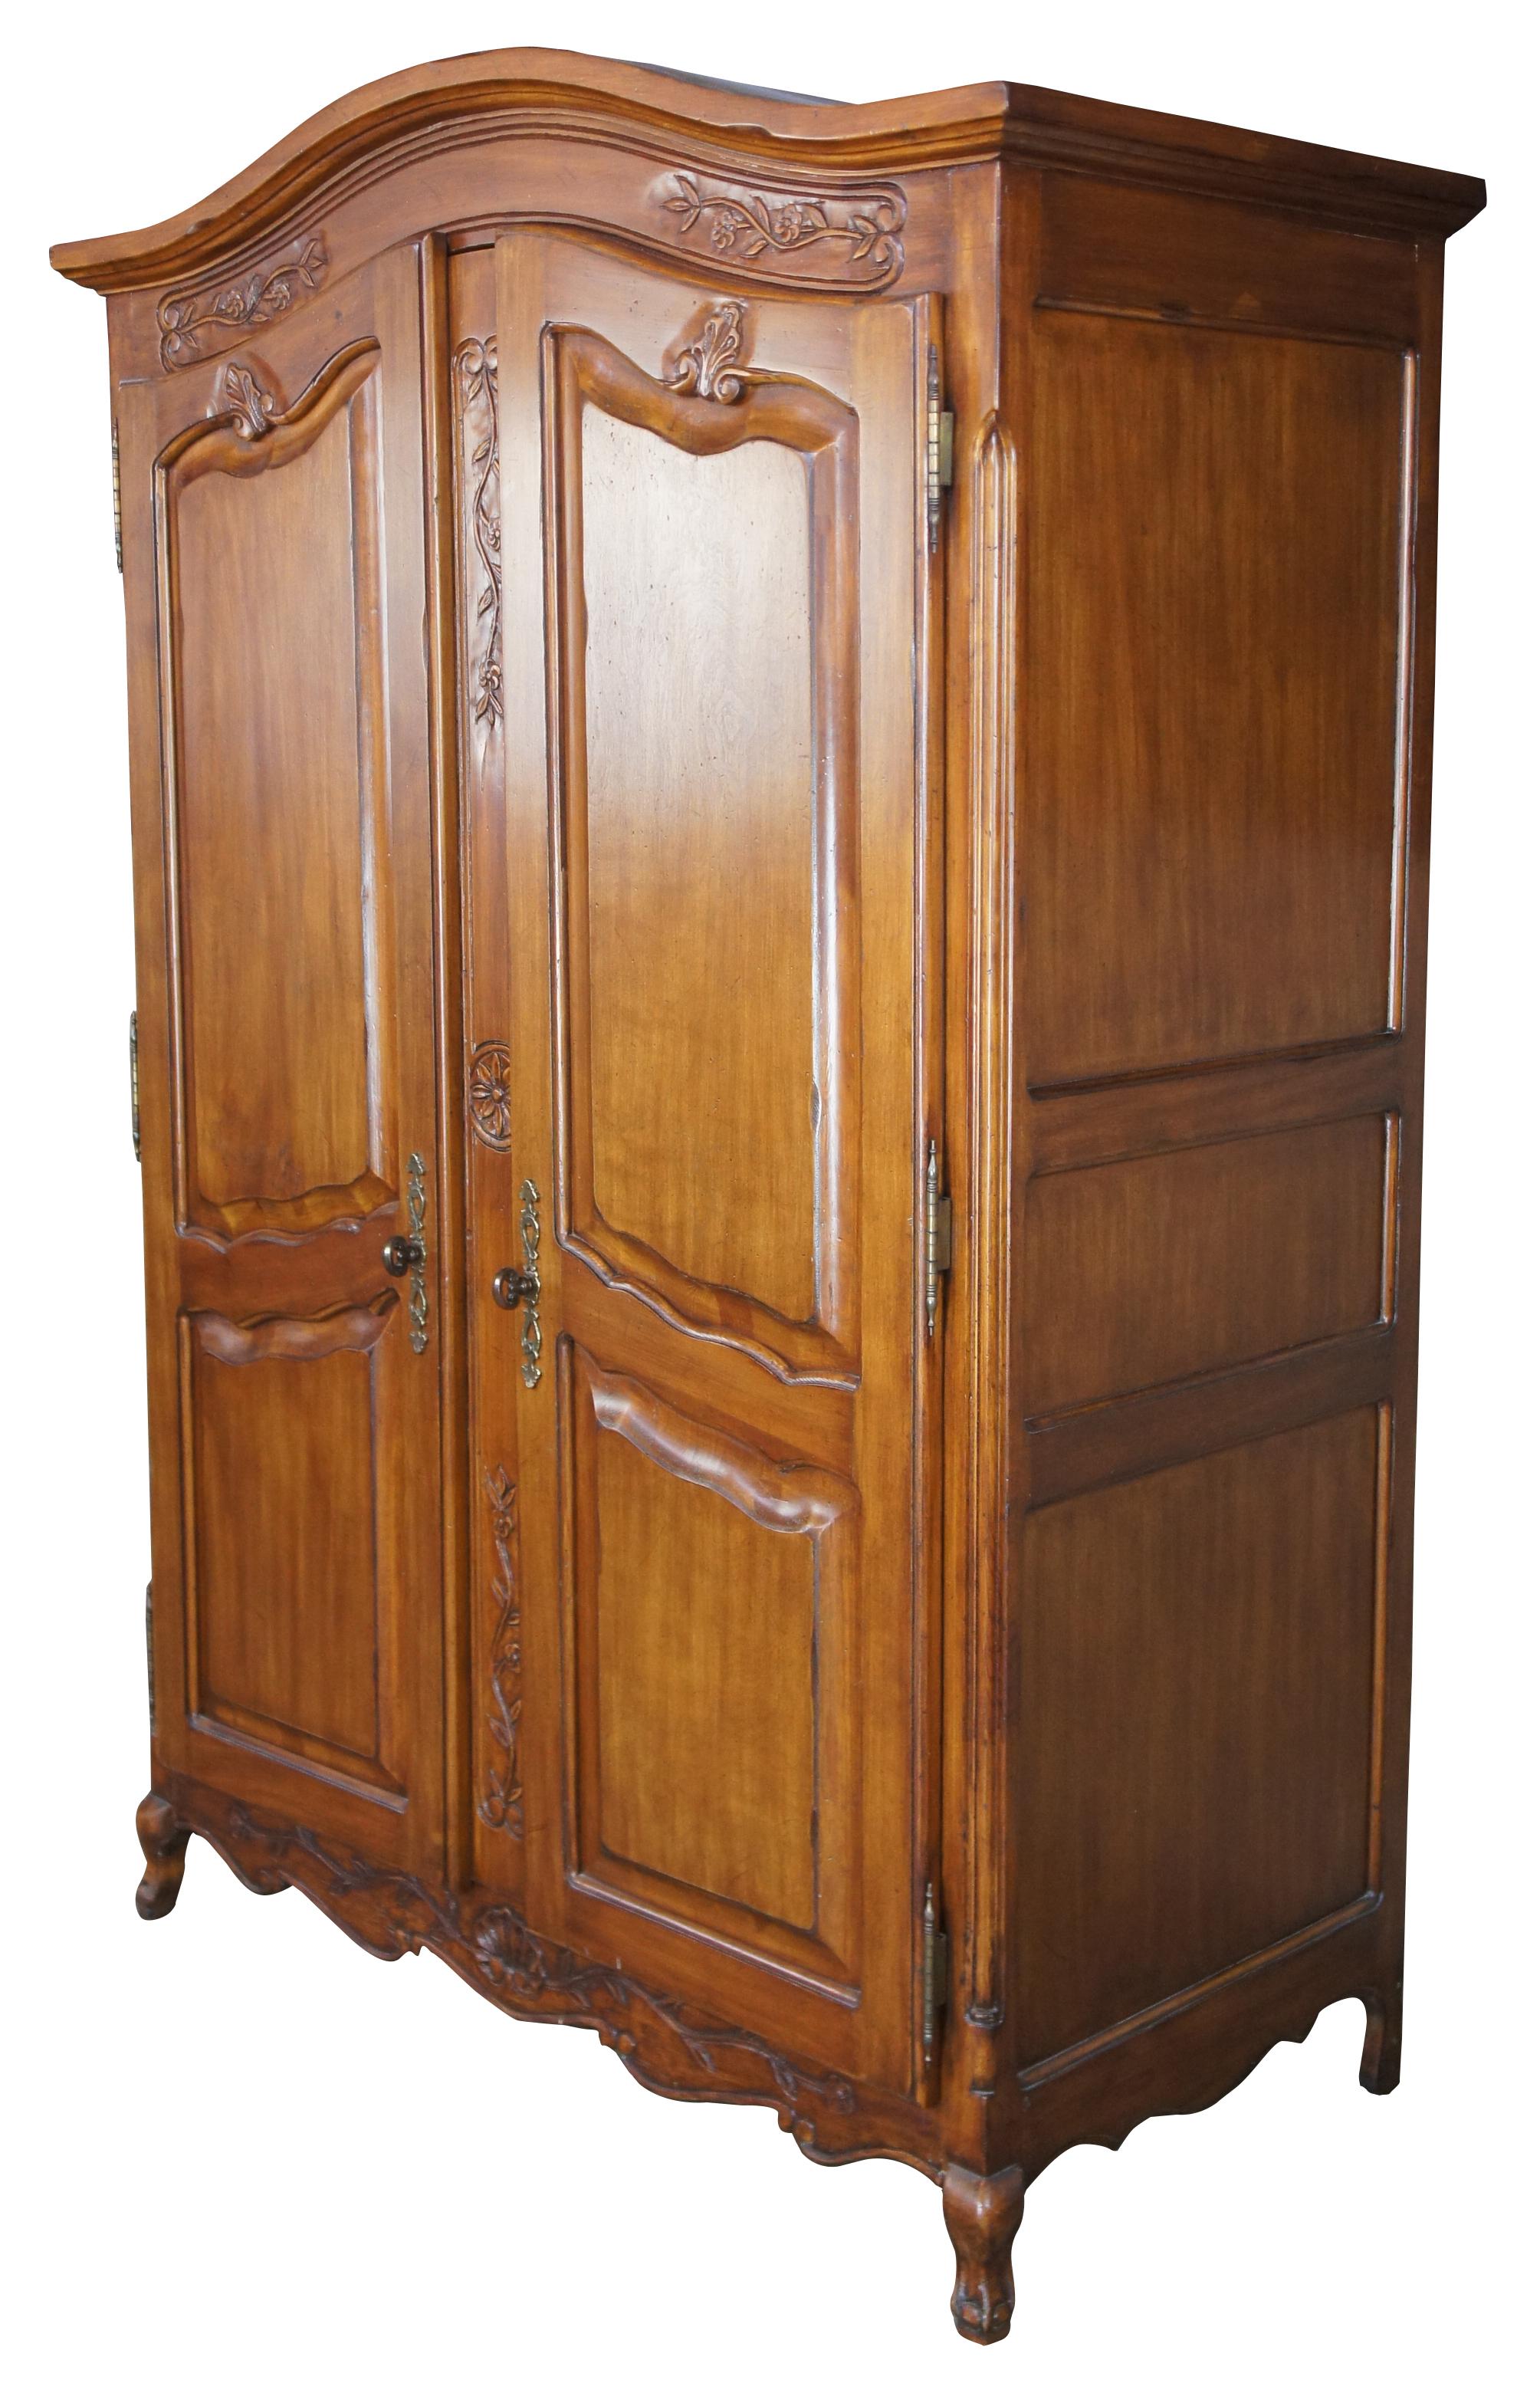 Vintage French Country armoire or wardrobe. Made of walnut with French styling with carved florals, shells, leaves with a central floral medallion and serpentine accents. Made in Mexico. Measure: 77